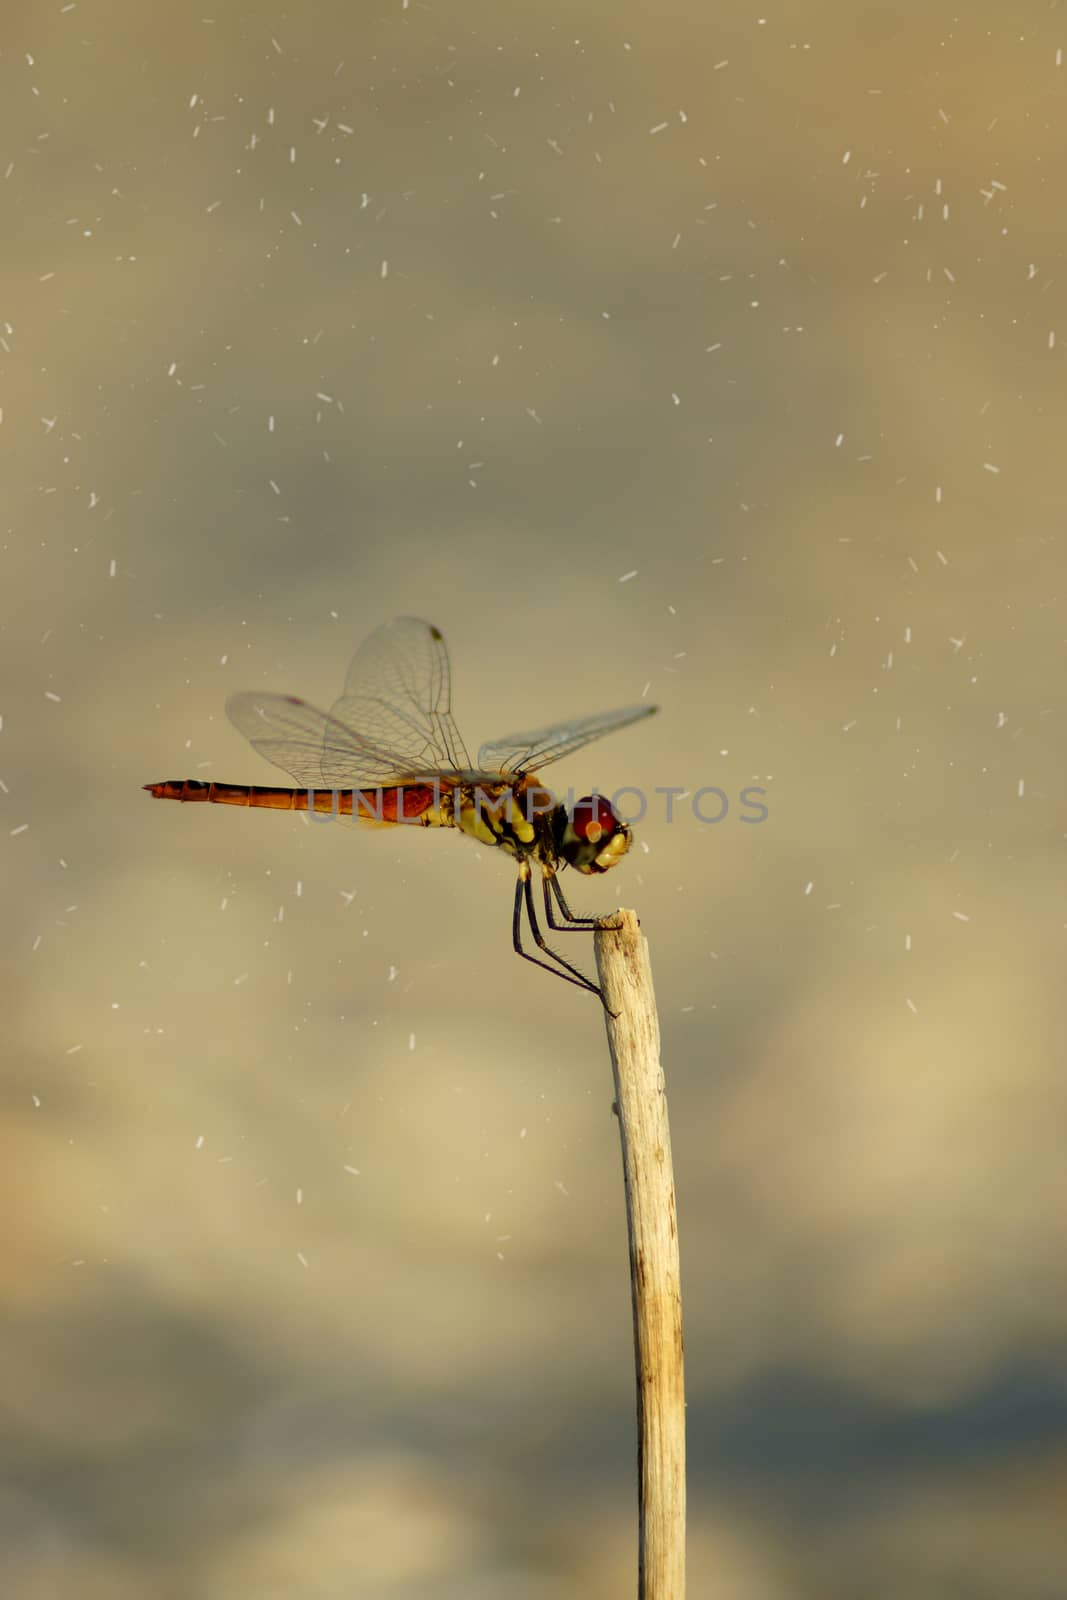 Dragonfly on the beach. by Noppharat_th